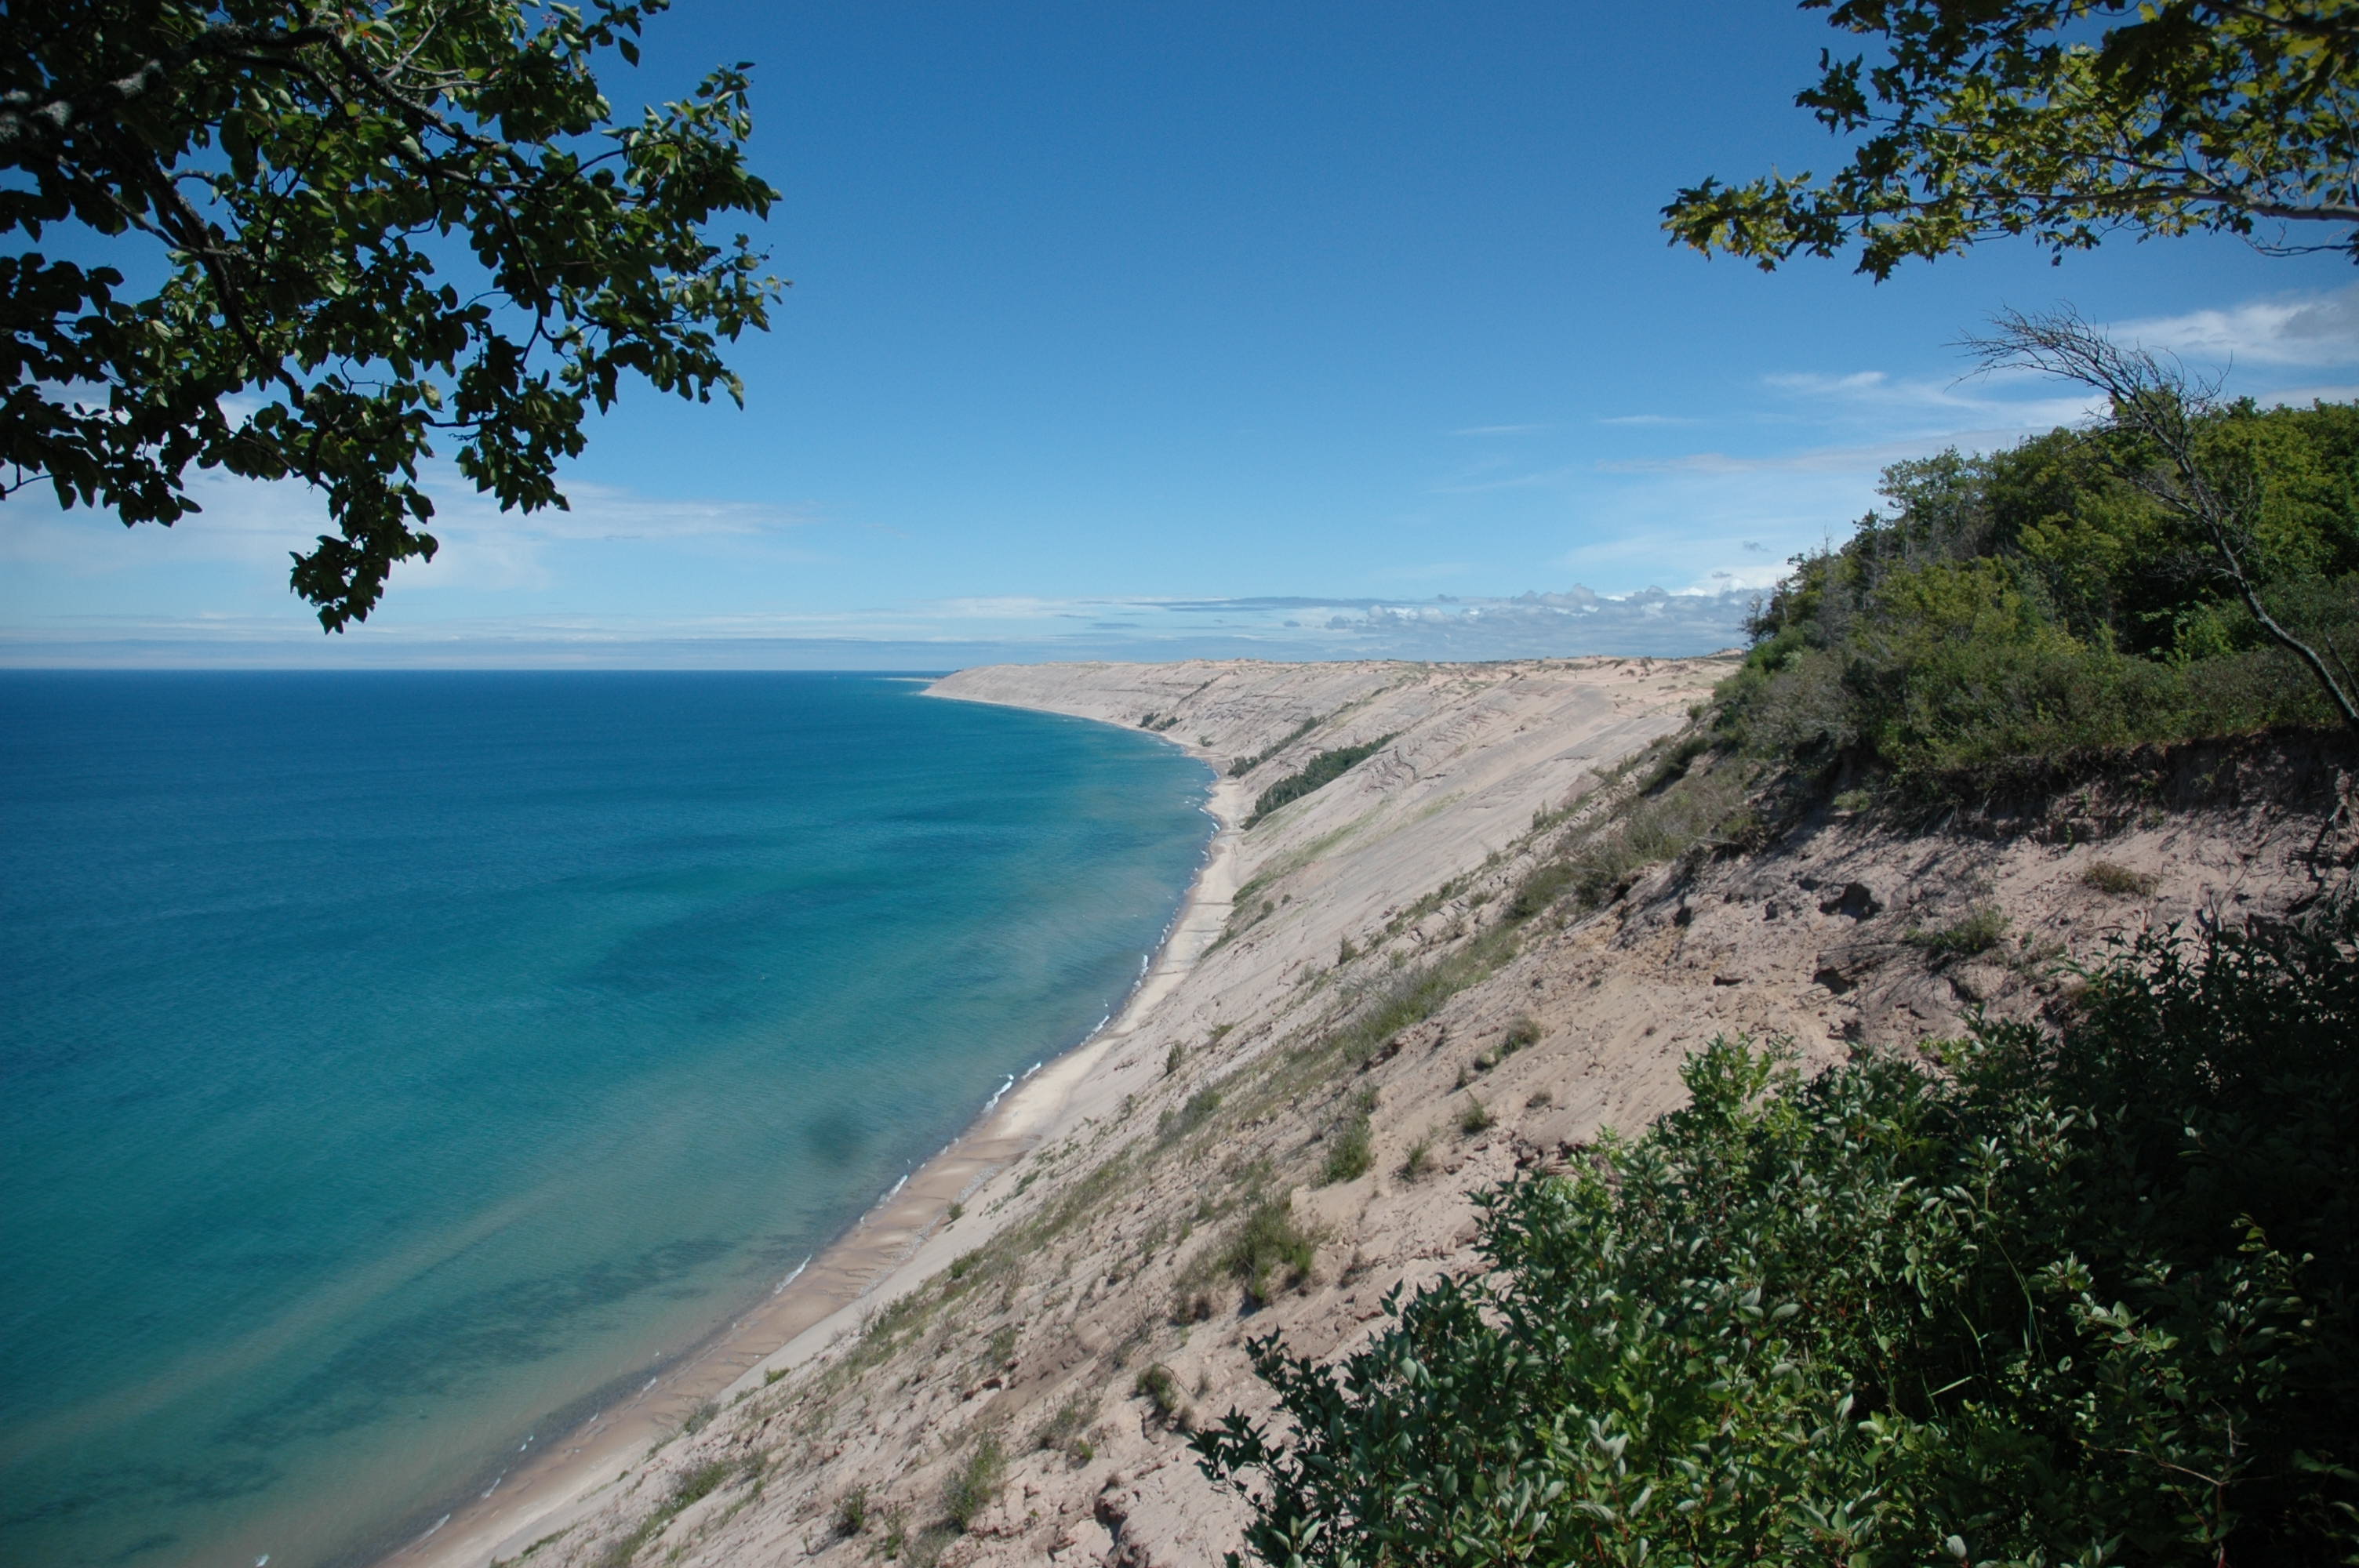 The Grand Sable Dunes rise up 300 feet from Lake Superior.